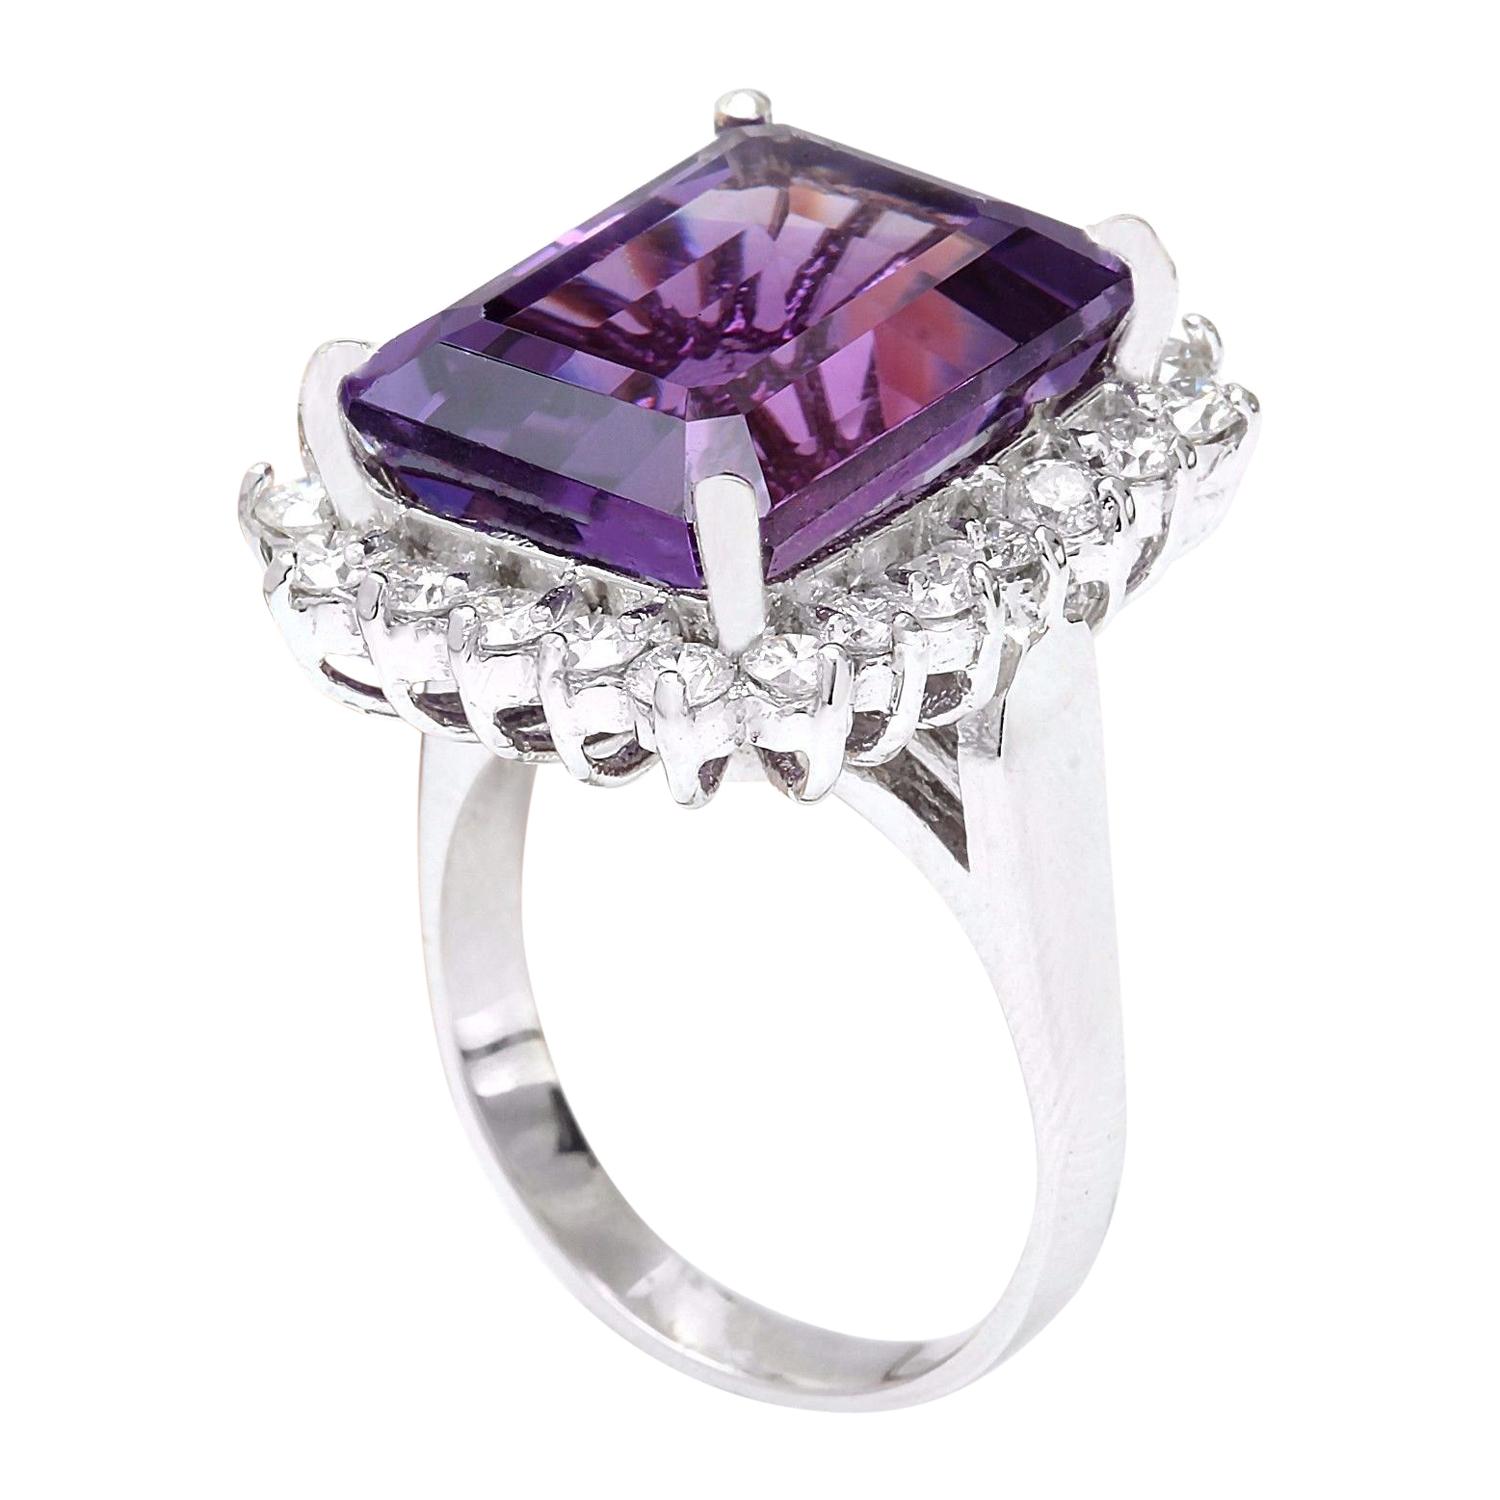 Emerald Cut Vibrant Natural Amethyst Diamond Ring In 14 Karat Solid White Gold  For Sale